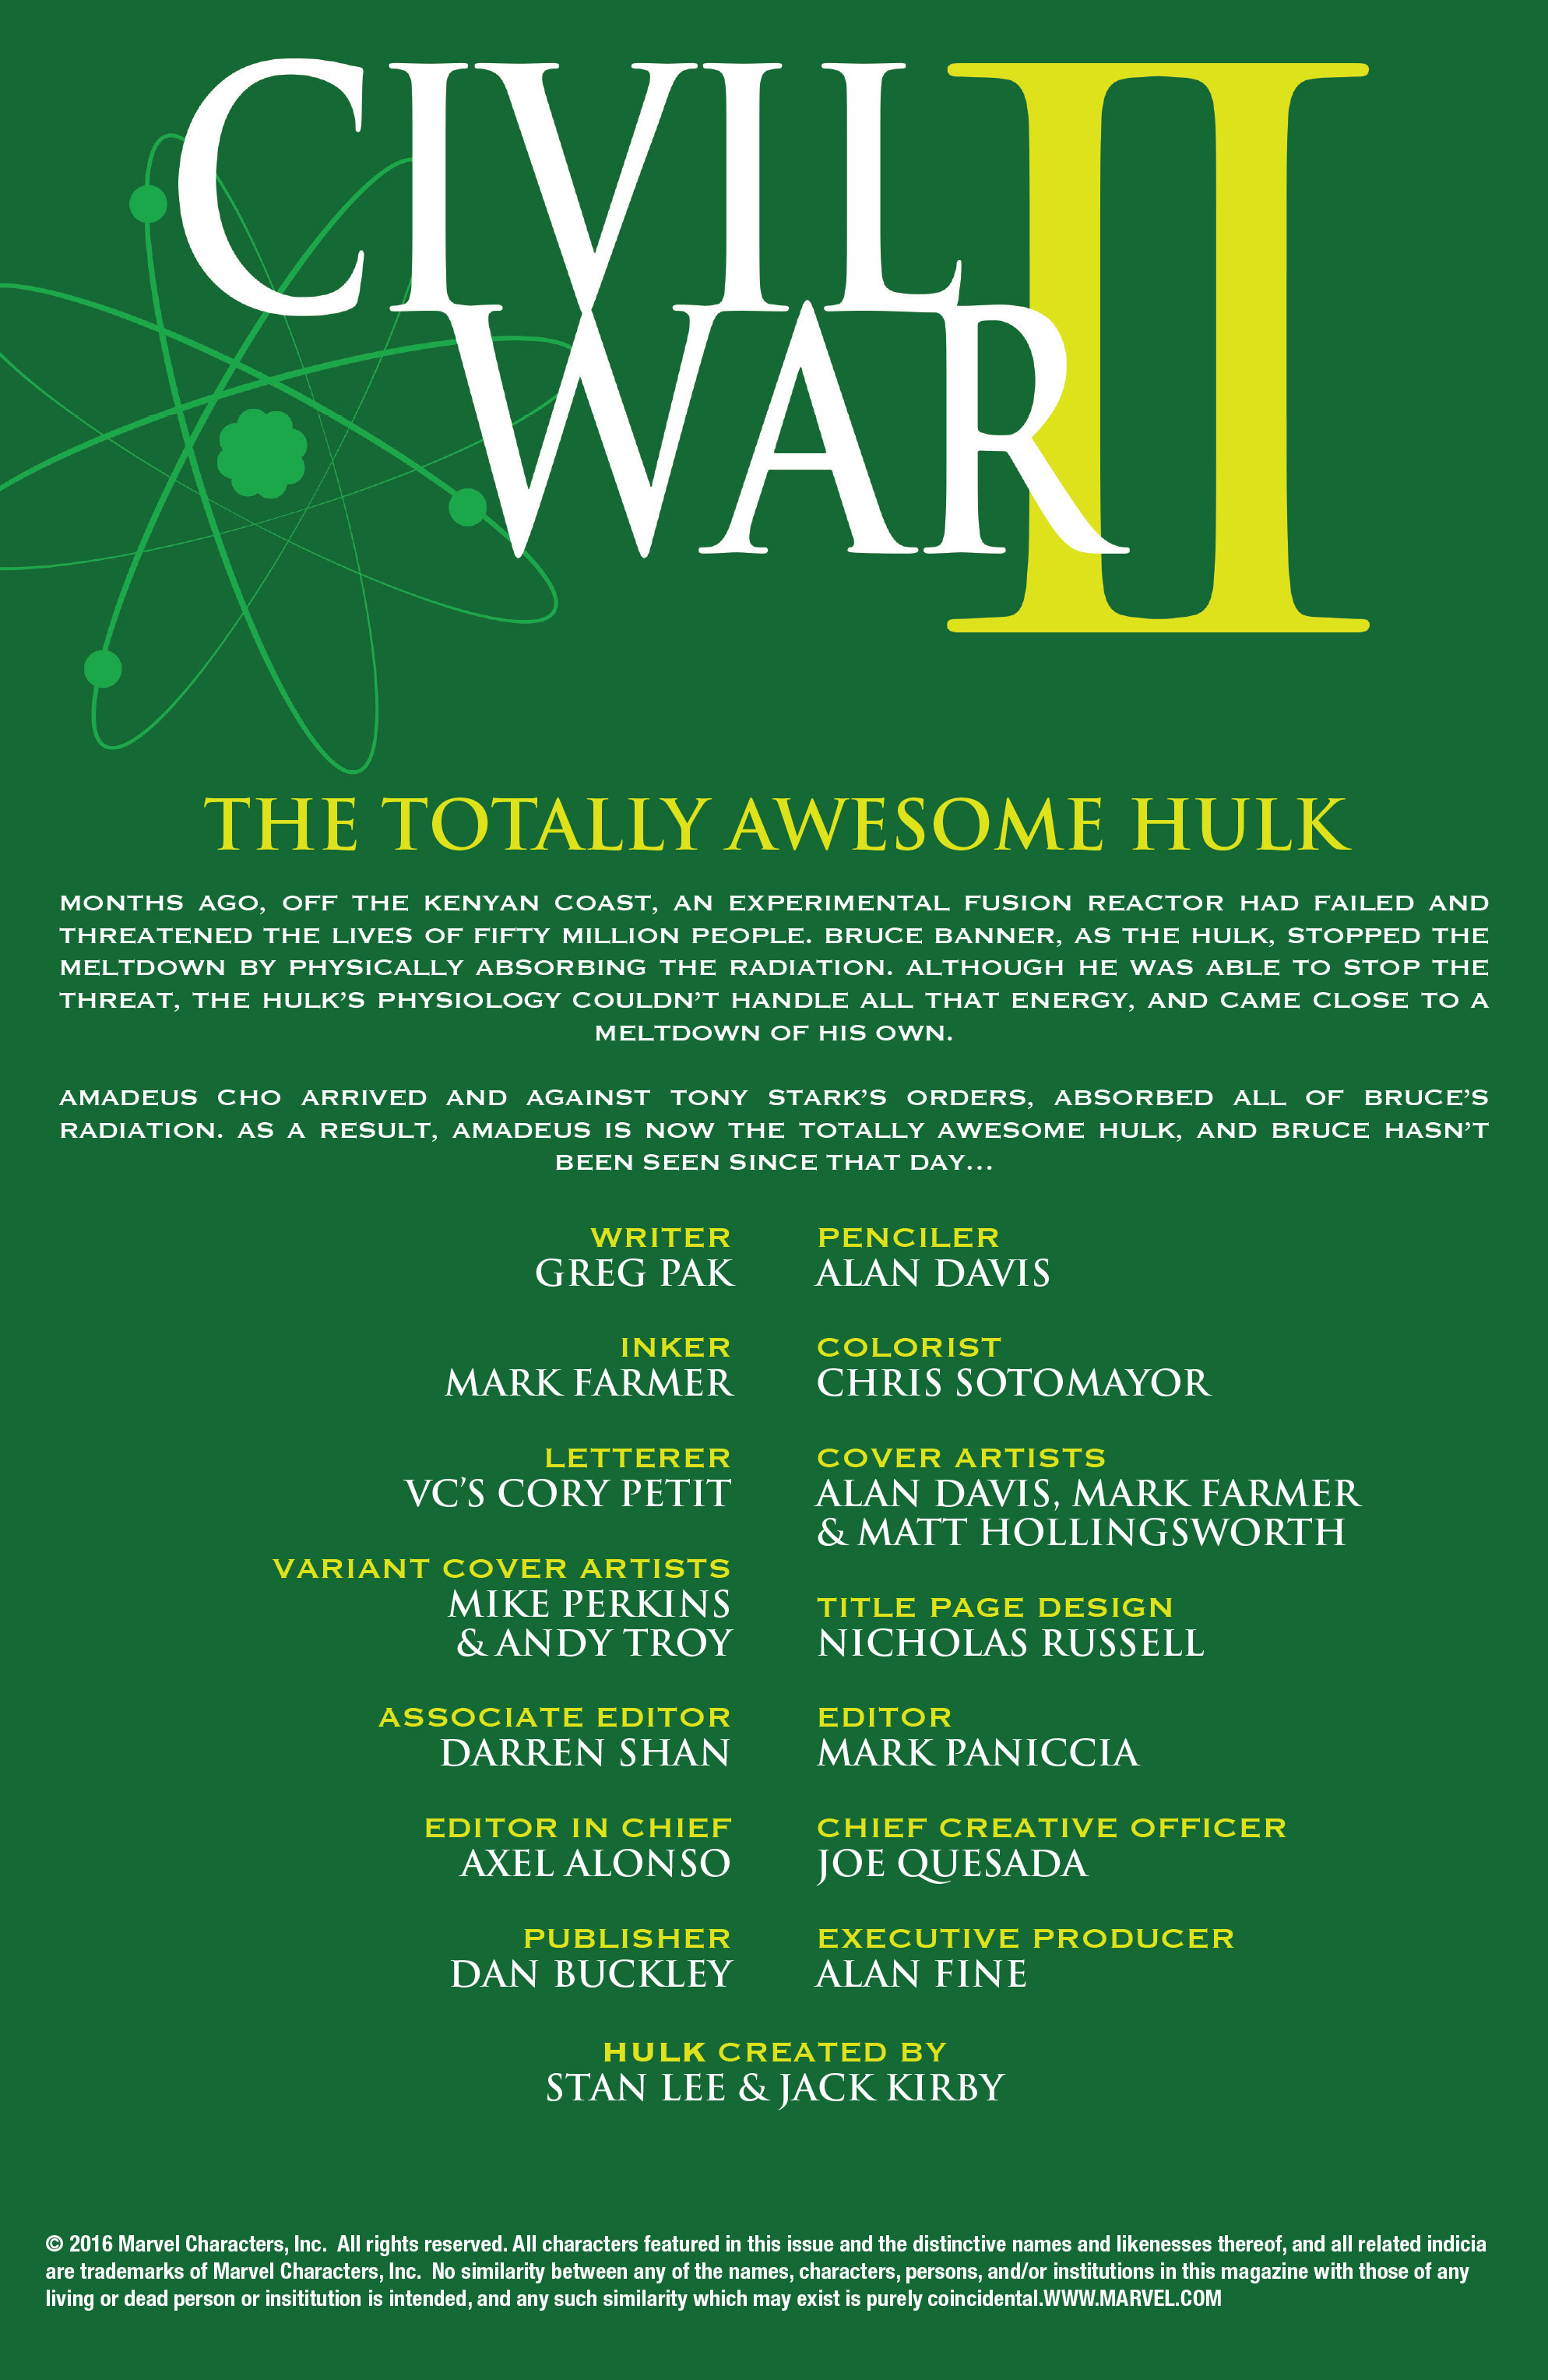 Read online Totally Awesome Hulk comic -  Issue #7 - 2